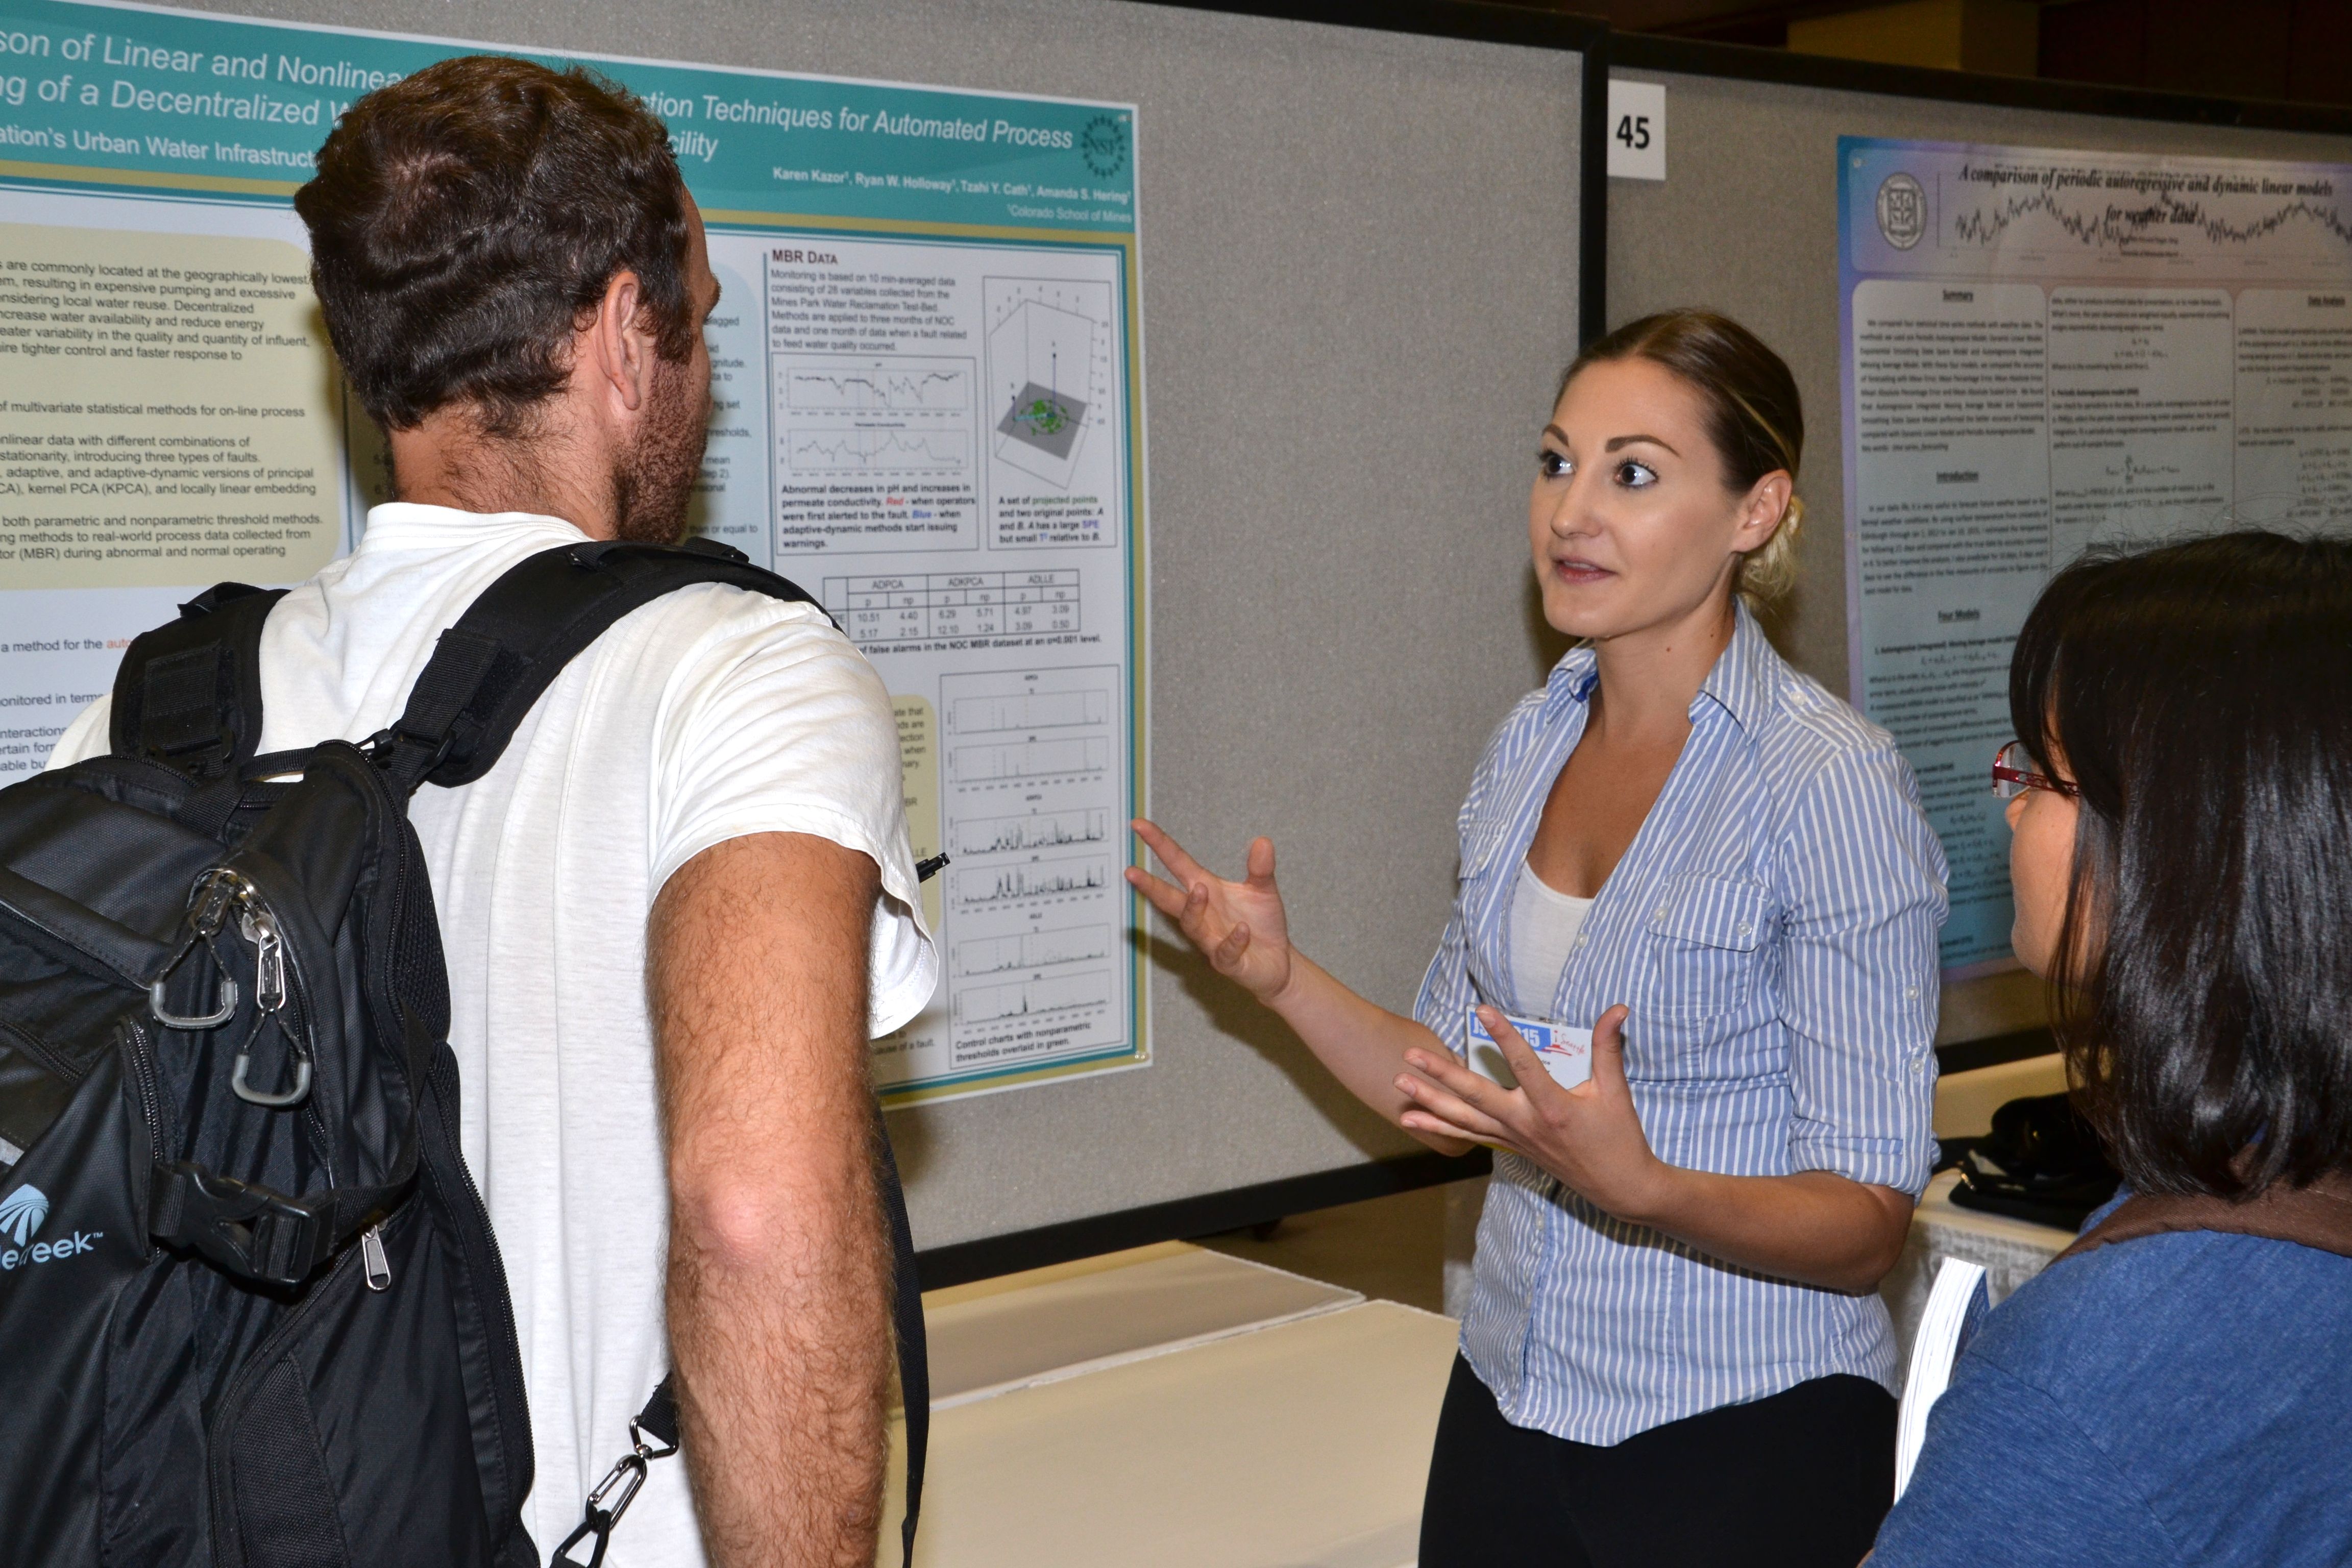 Karen Kazor of the Colorado School of Mines discusses her poster, titled "Comparison of Linear and Nonlinear Dimension Reduction Techniques for Automated Process Monitoring of a Decentralized Wastewater Treatment Facility." 